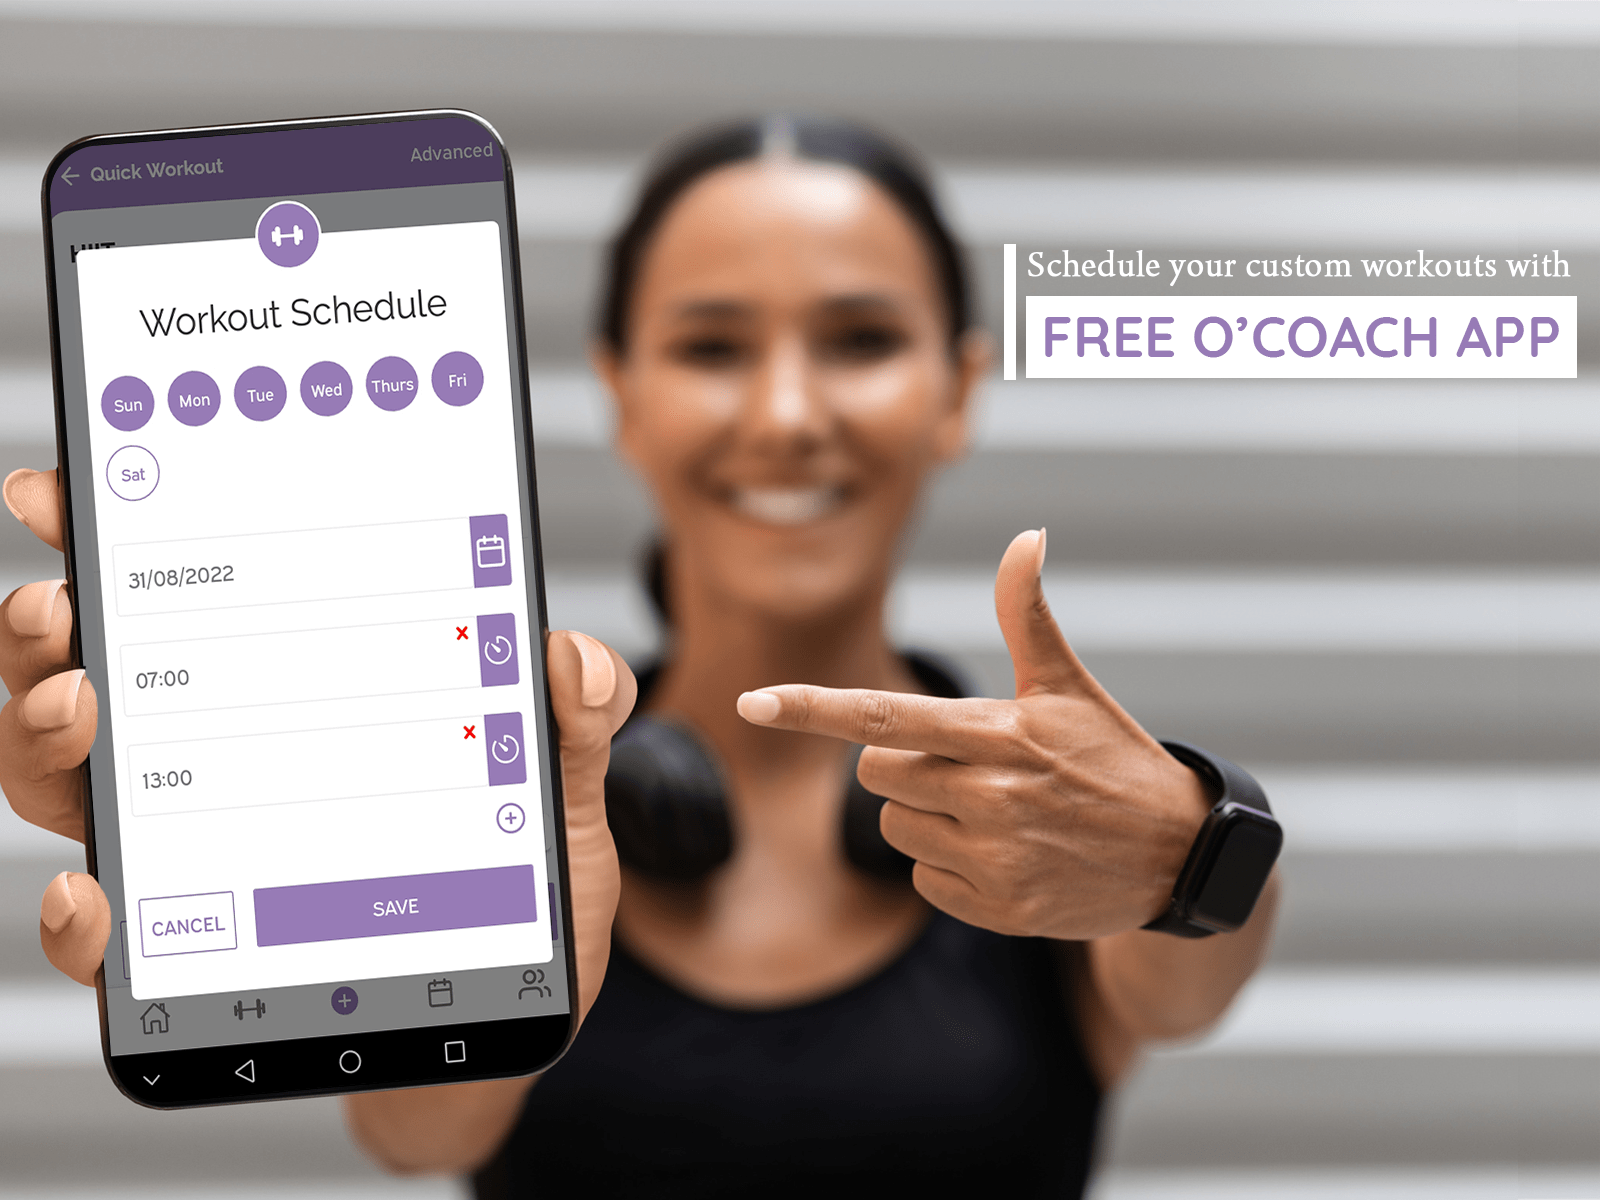 Schedule your own custom strengthening routine with O'Coach custom workout app